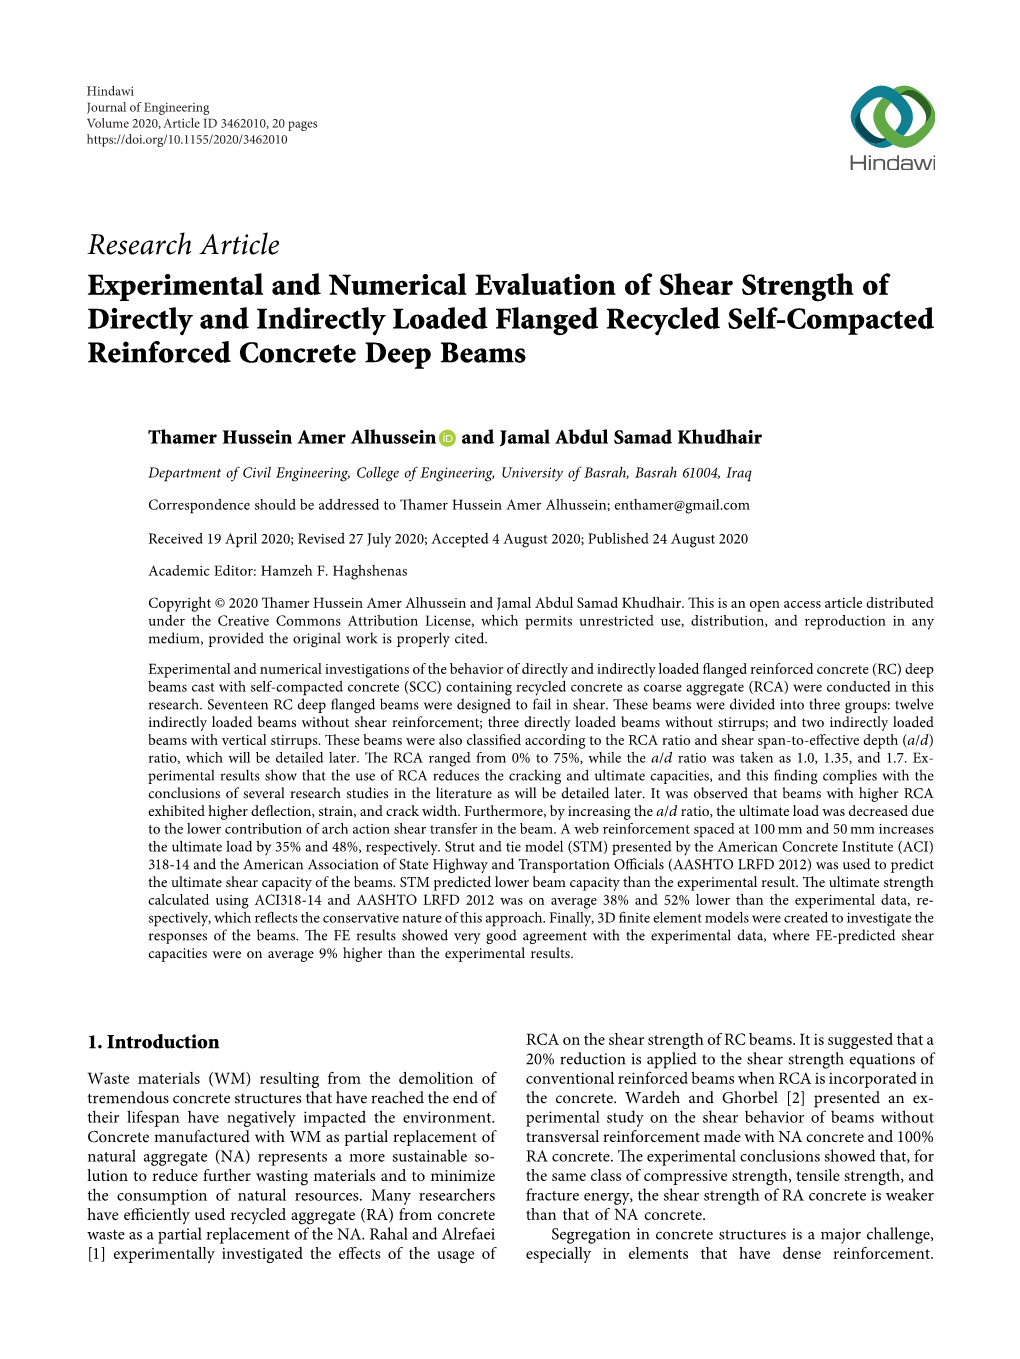 Experimental and Numerical Evaluation of Shear Strength of Directly and Indirectly Loaded Flanged Recycled Self-Compacted Reinforced Concrete Deep Beams